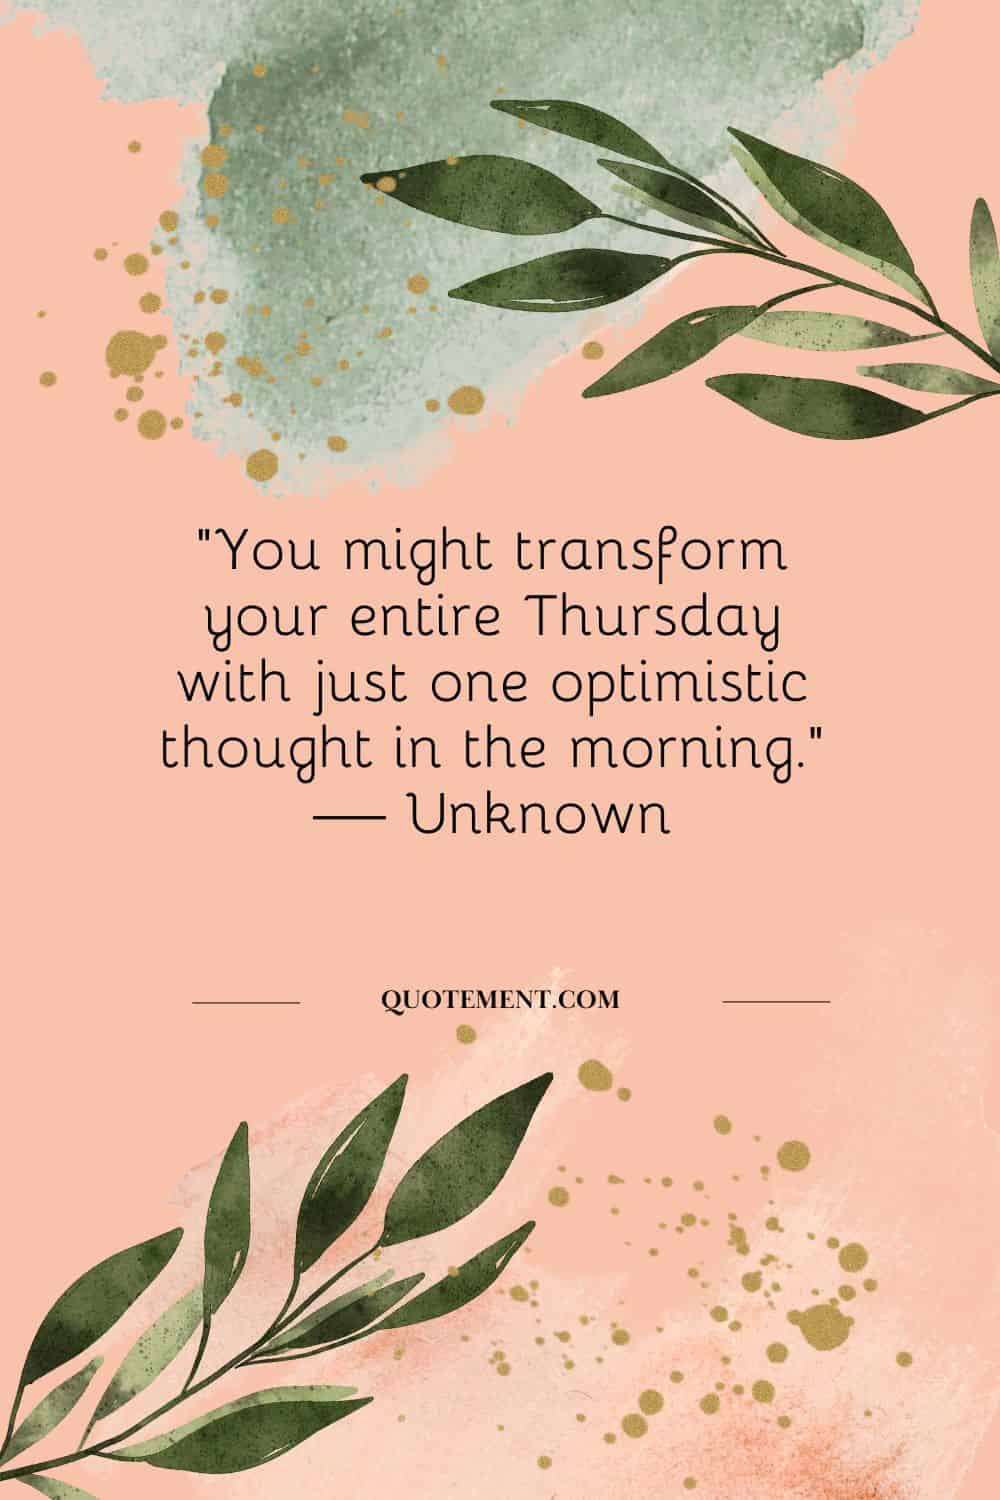 “You might transform your entire Thursday with just one optimistic thought in the morning.” — Unknown